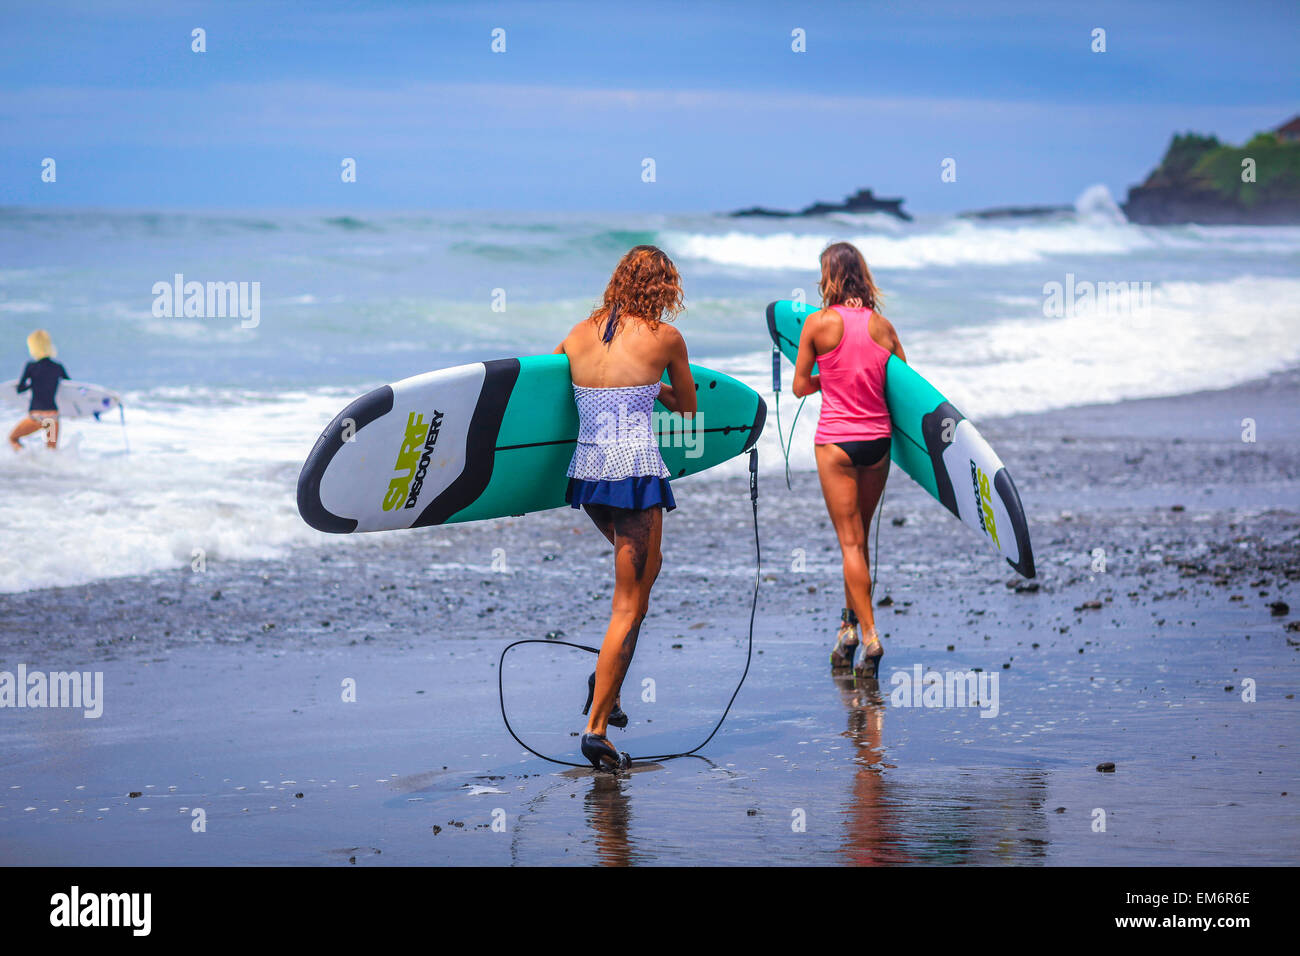 Surfer girls catch waves in high heels. Stock Photo